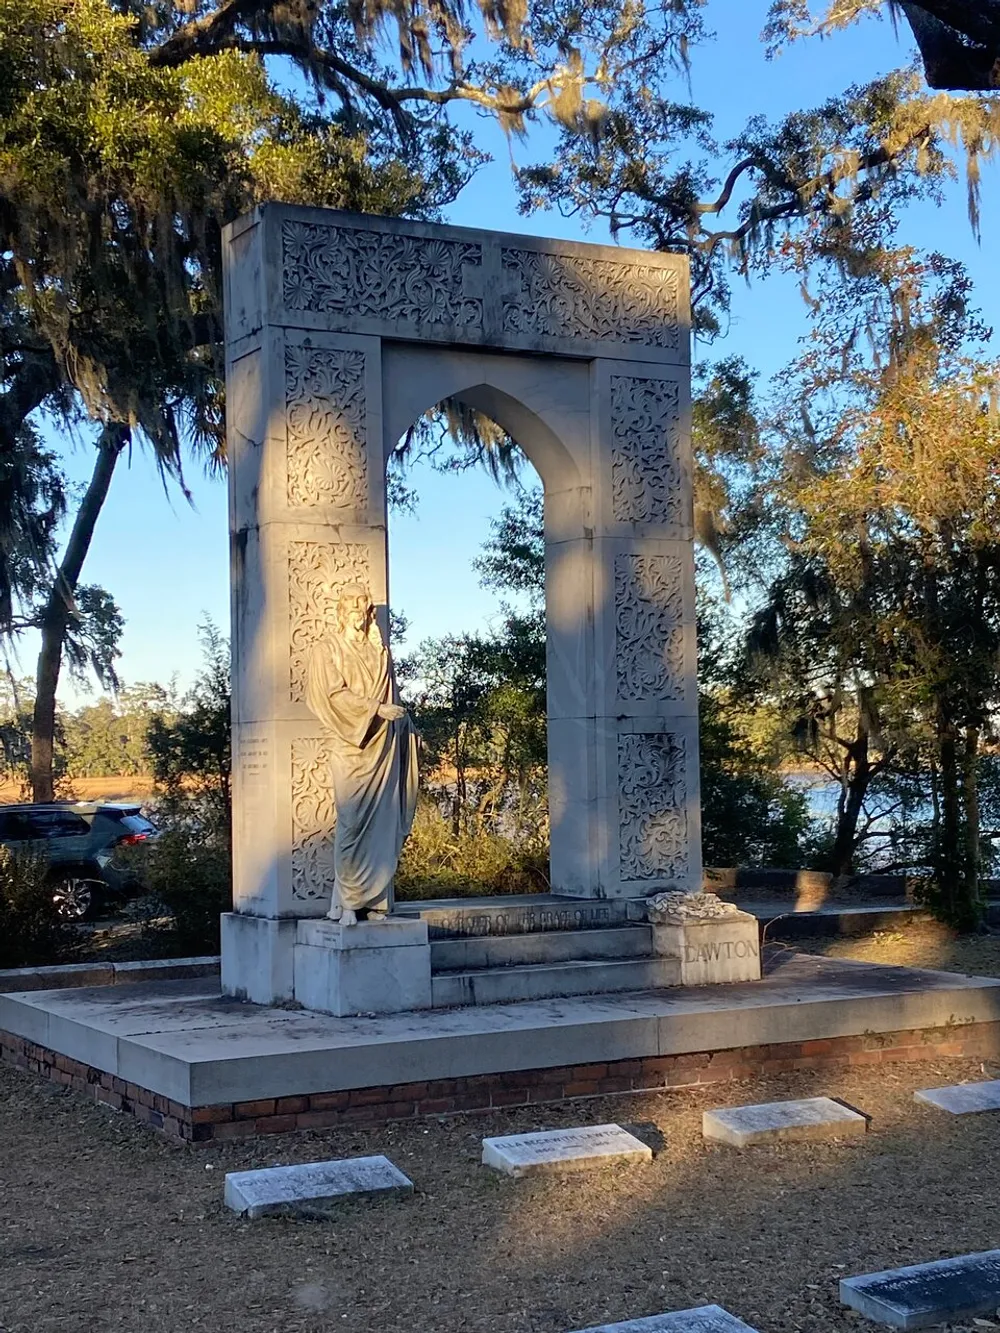 The image displays an ornate stone monument featuring a central archway with intricate carvings and a draped statue within surrounded by several headstones set against a backdrop of Spanish moss-draped trees and a clear sky